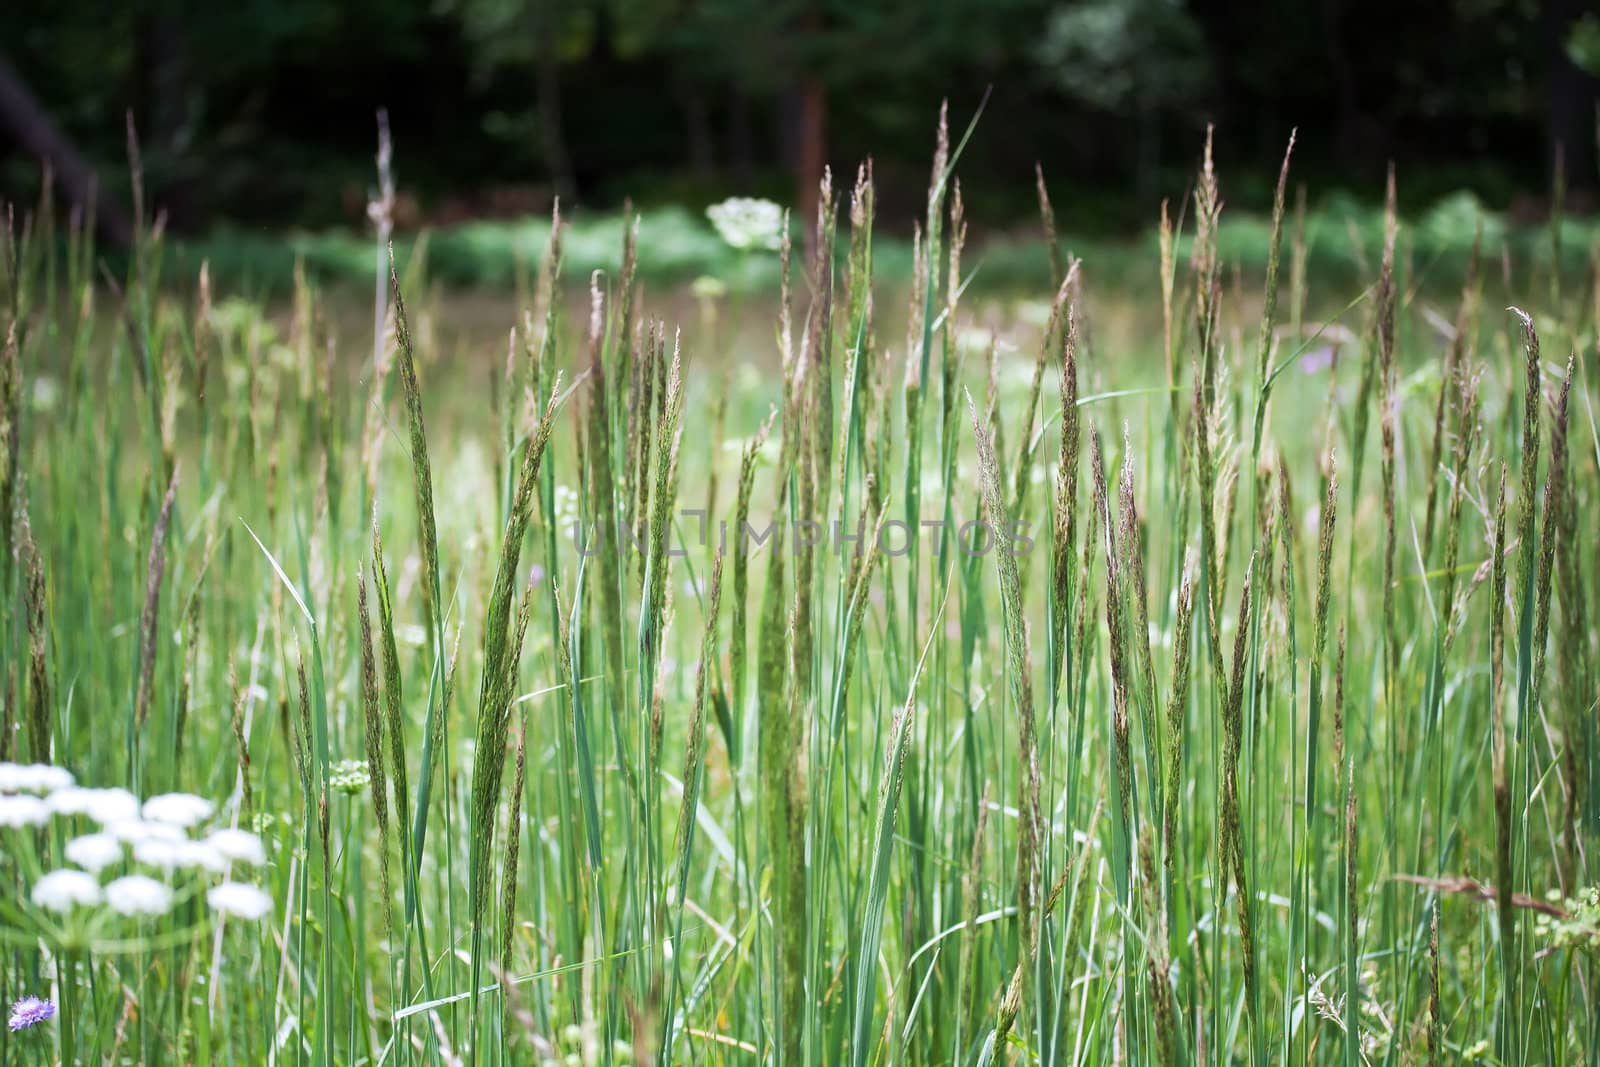 Carex  commonly known as sedges, west europe meadow